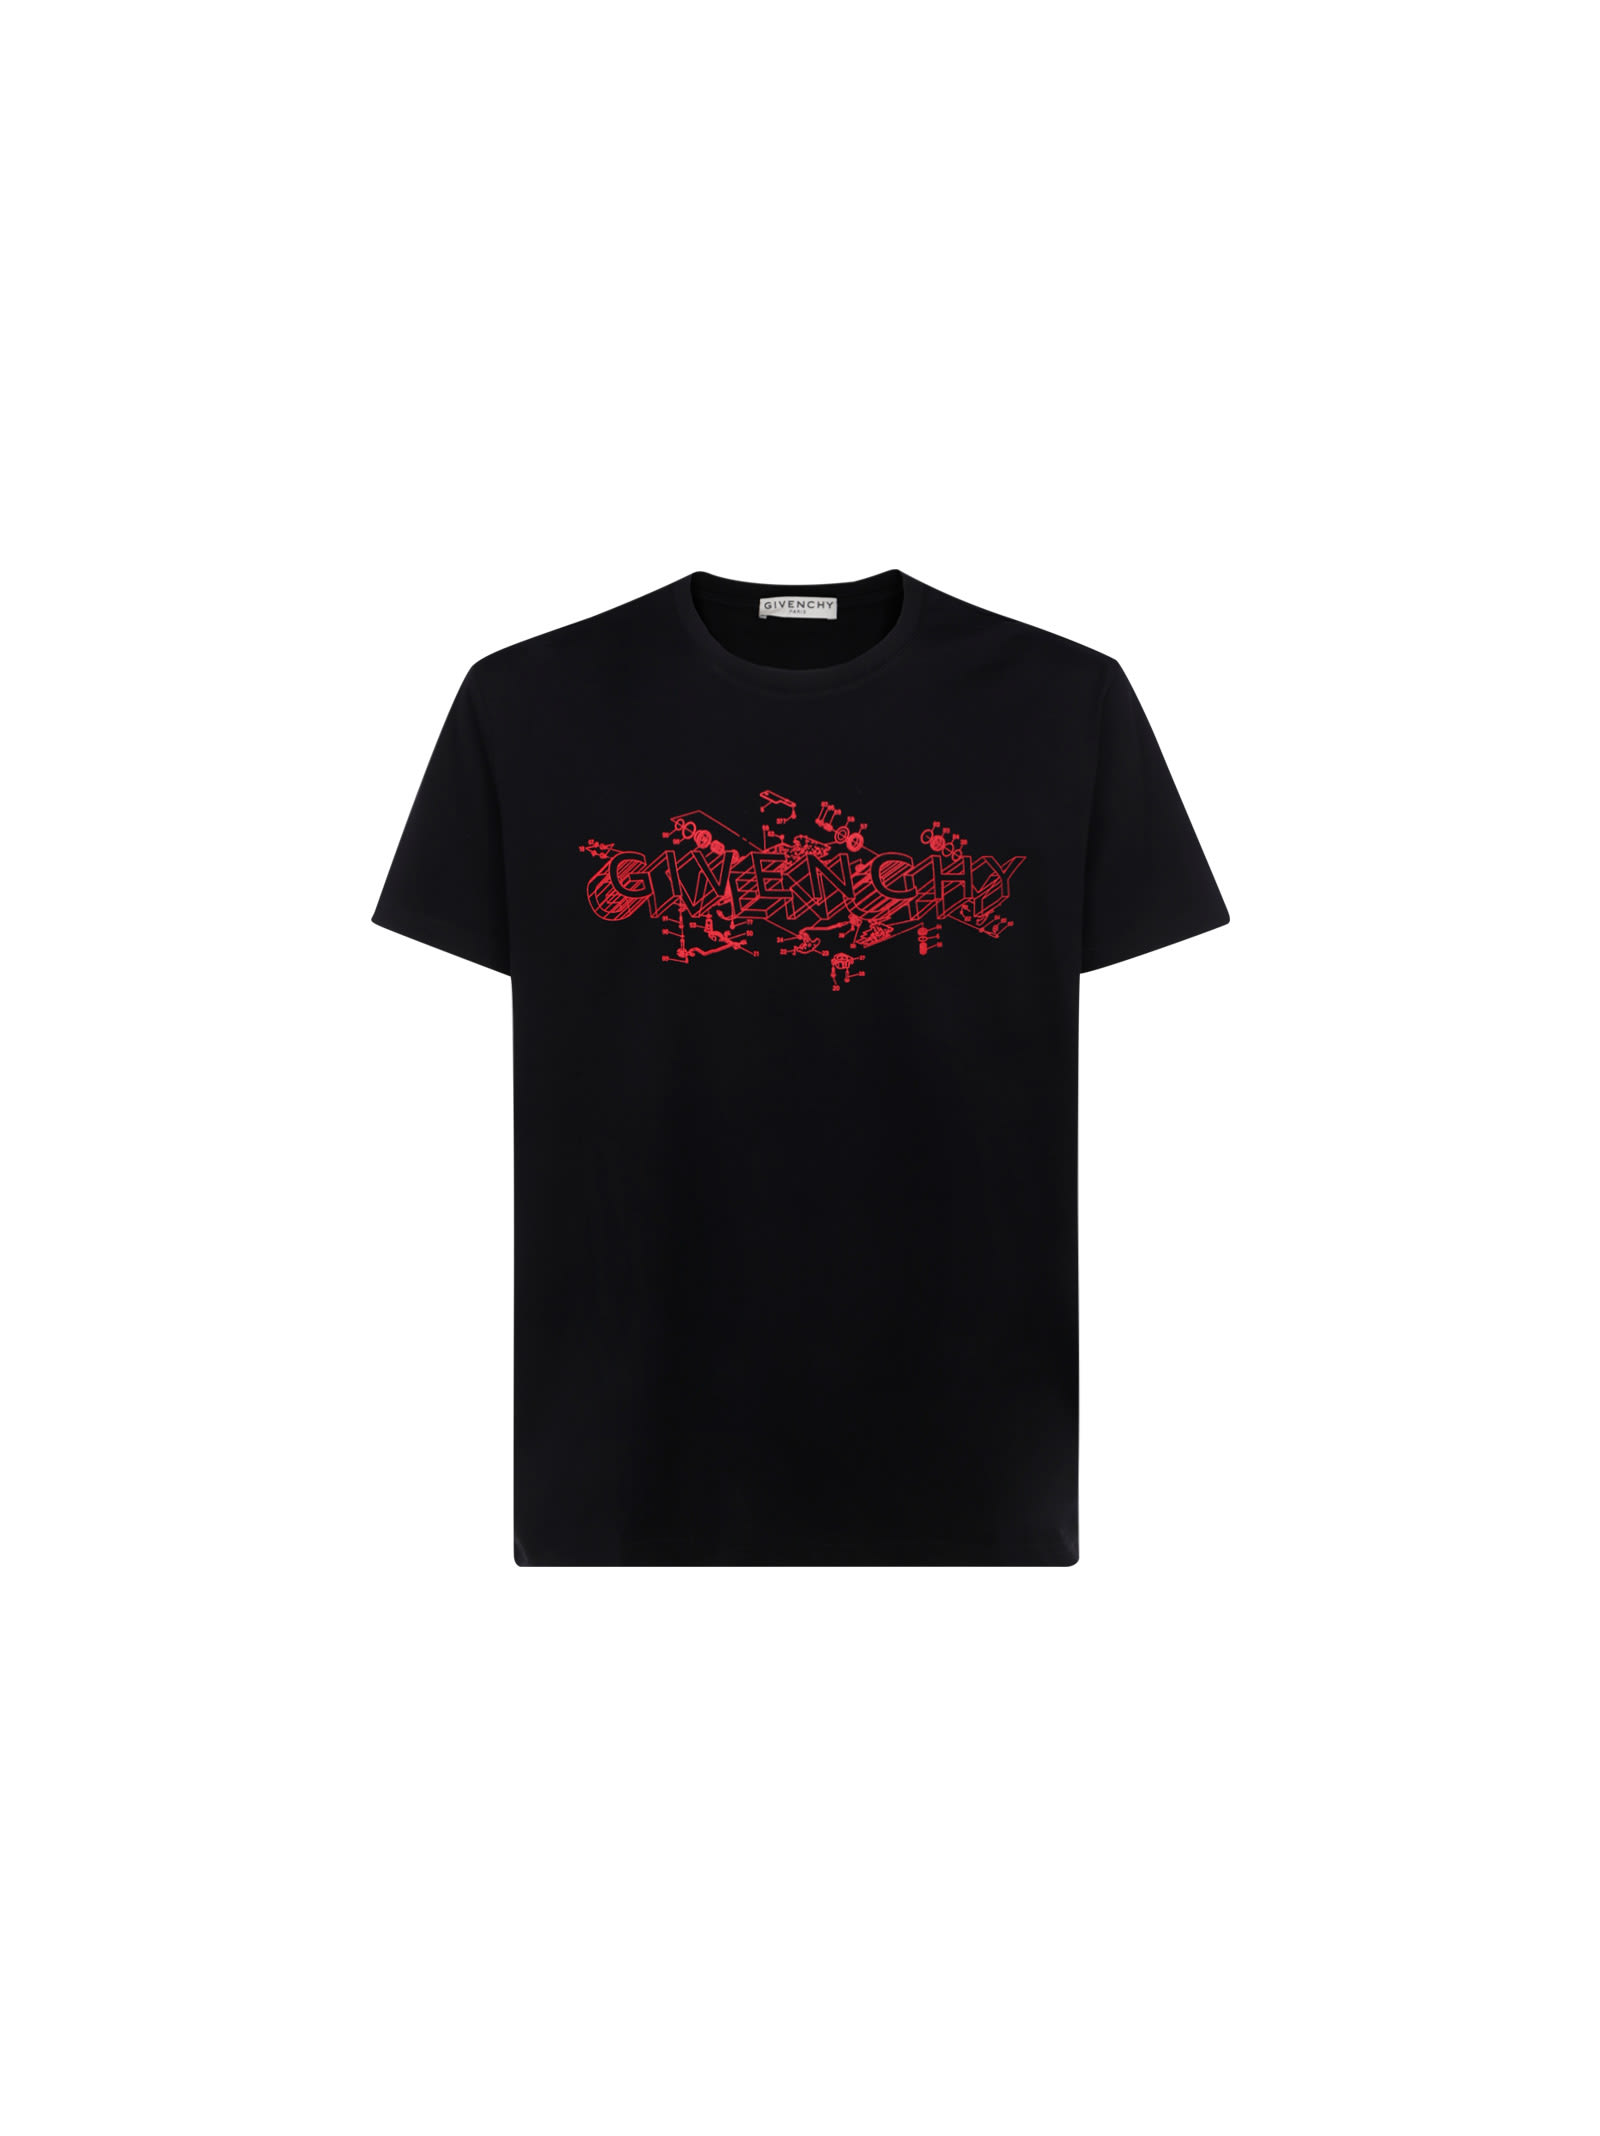 givenchy usa online